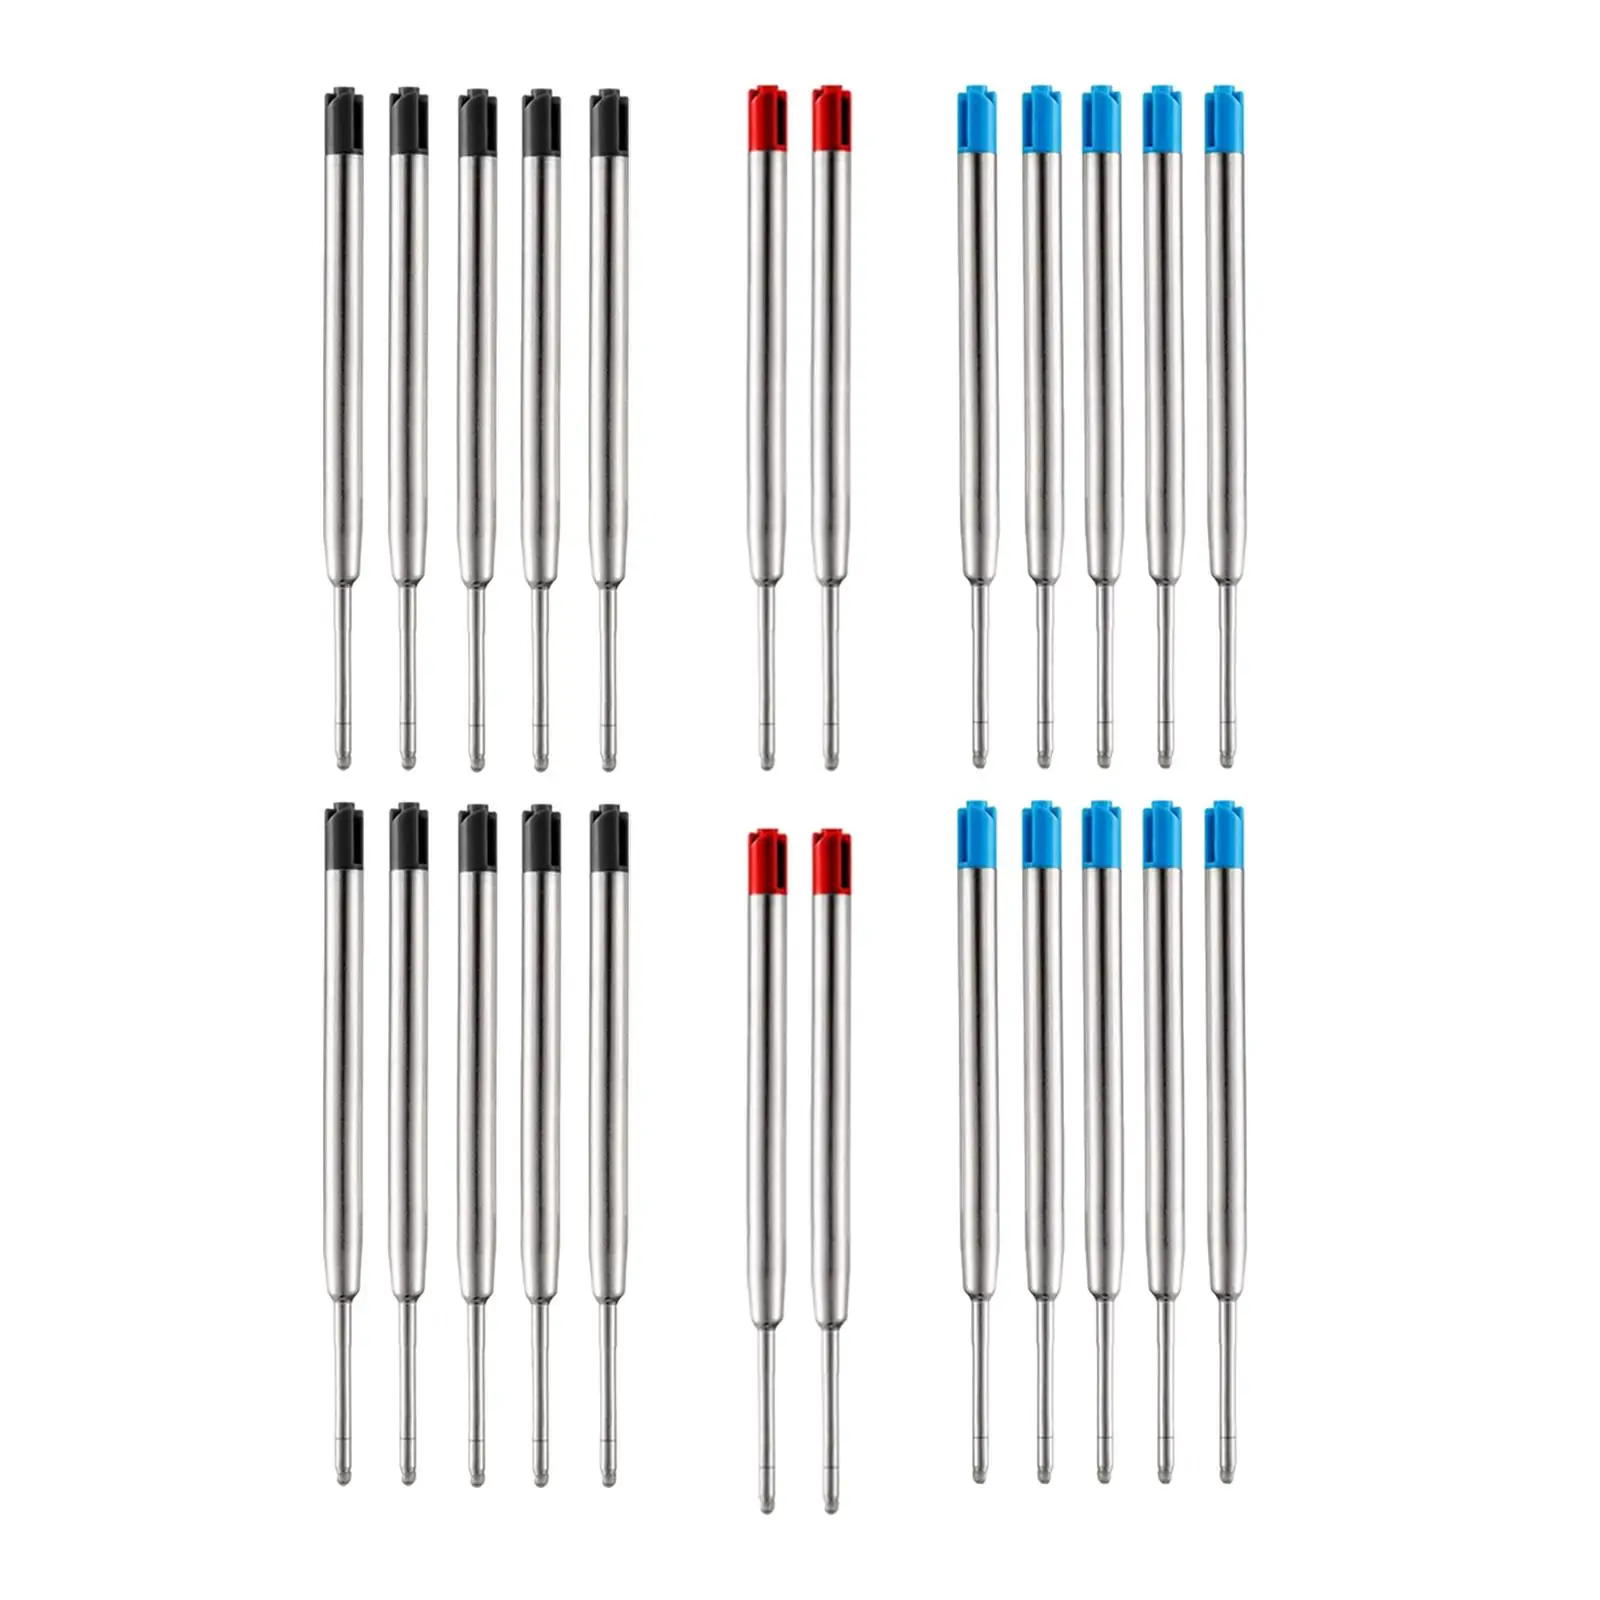 24Pcs Rotating Ballpoint Pen Refills Replace G2 Ink Pen for Gift Students